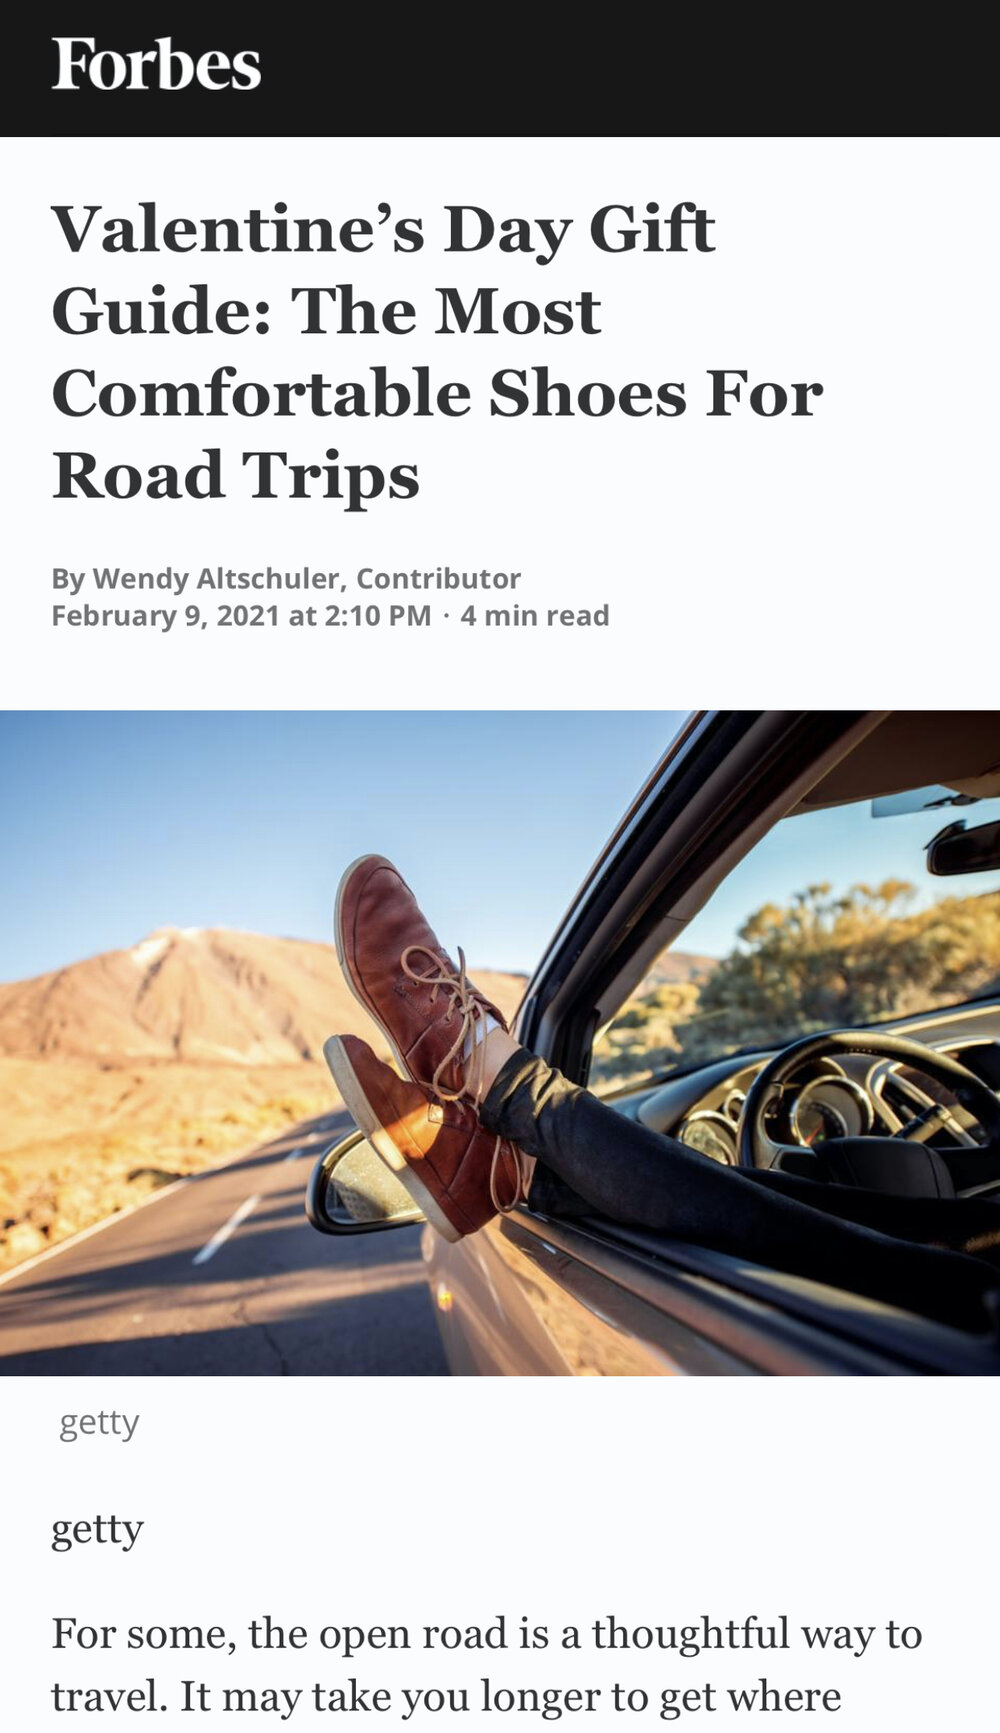 Valentine’s Day Gift Guide: The Most Comfortable Shoes For Road Trips